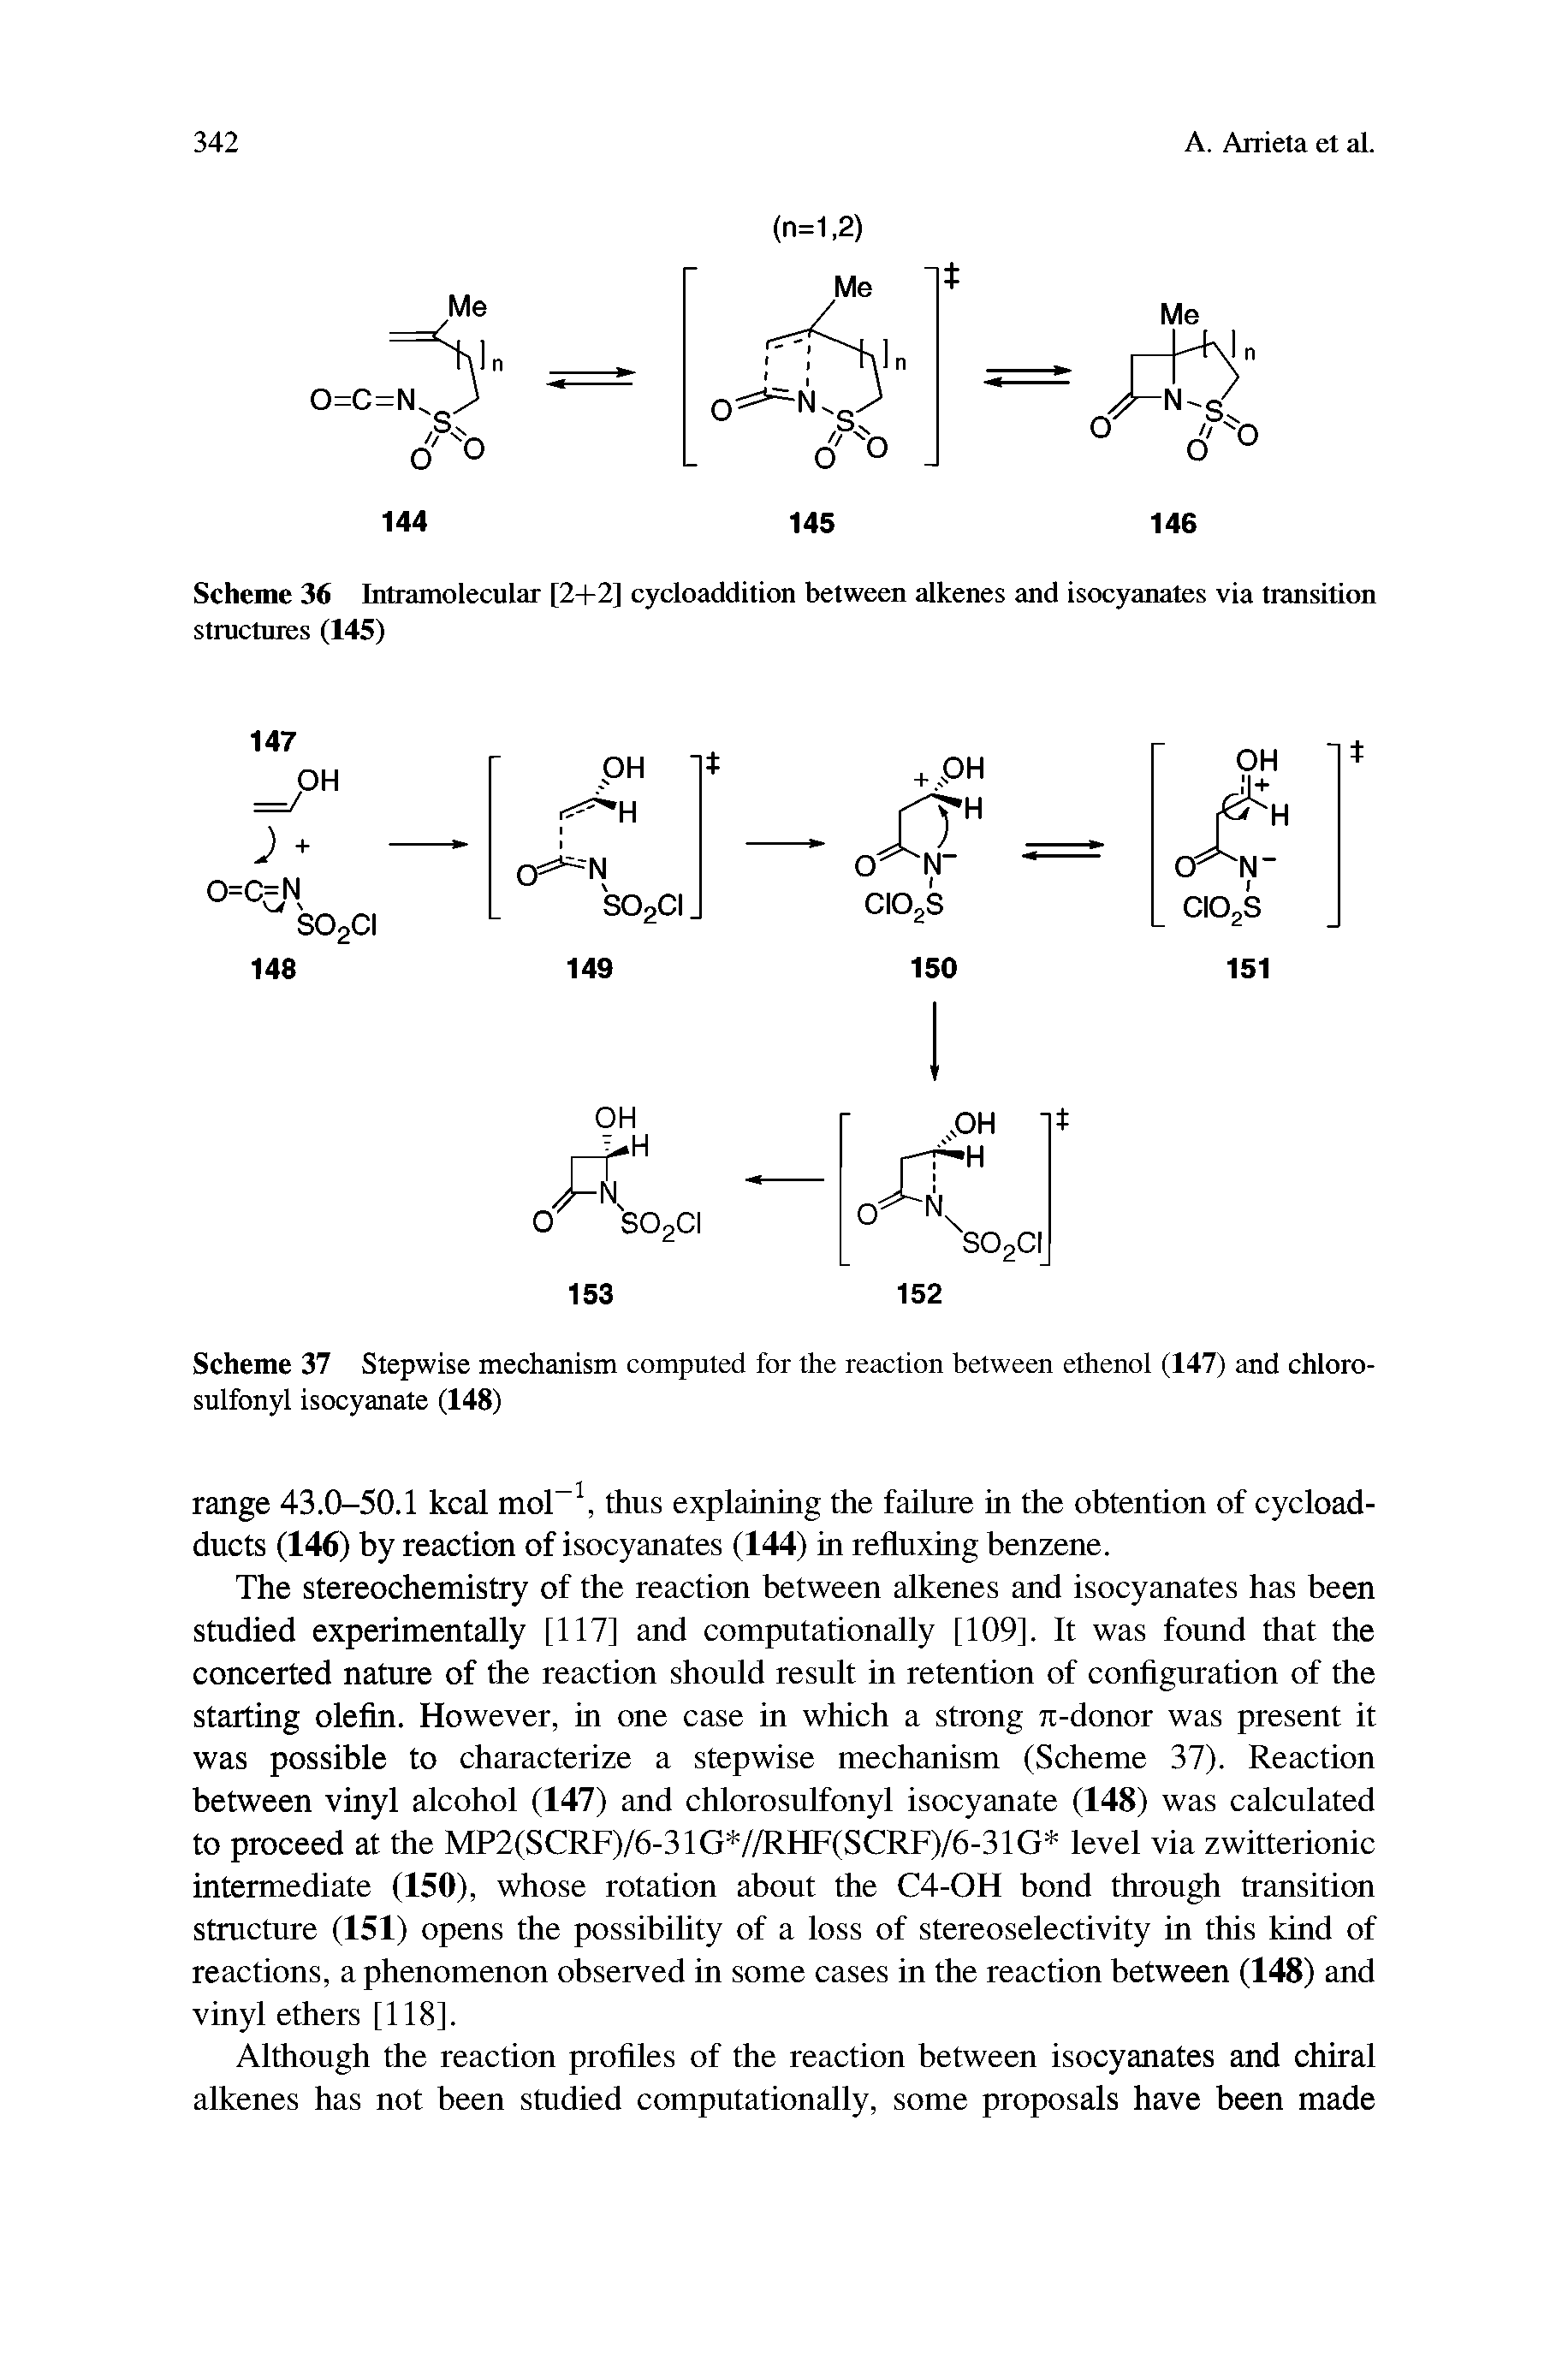 Scheme 37 Stepwise mechanism computed for the reaction between ethenol (147) and chloro-sulfonyl isocyanate (148)...